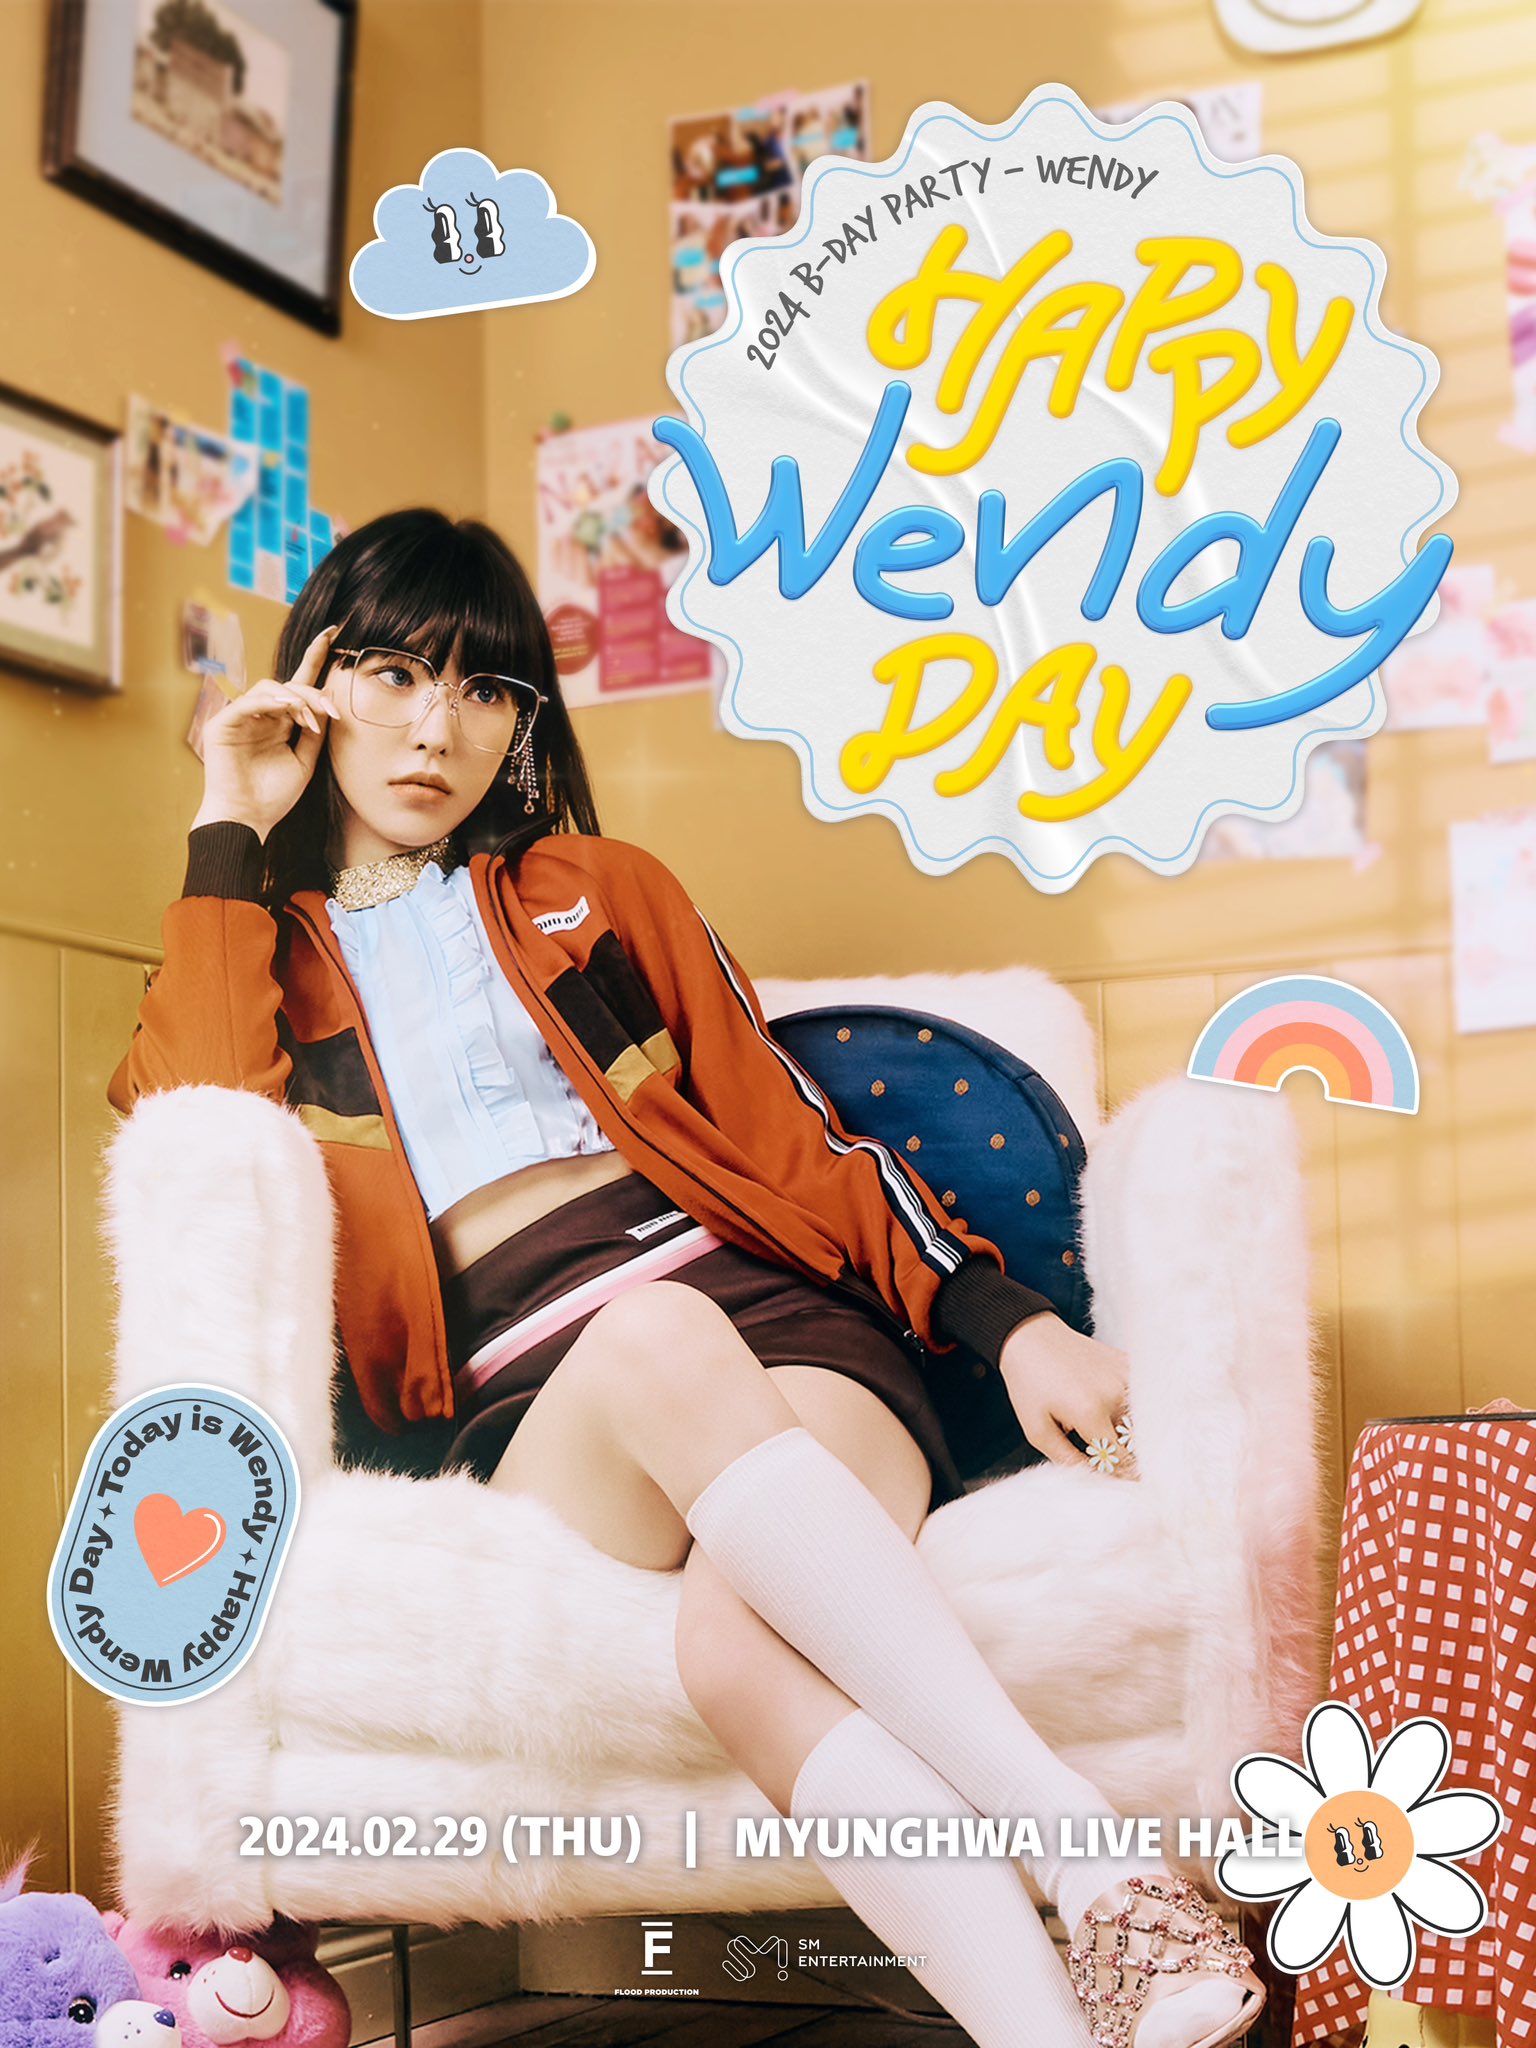 @todayis_wendy